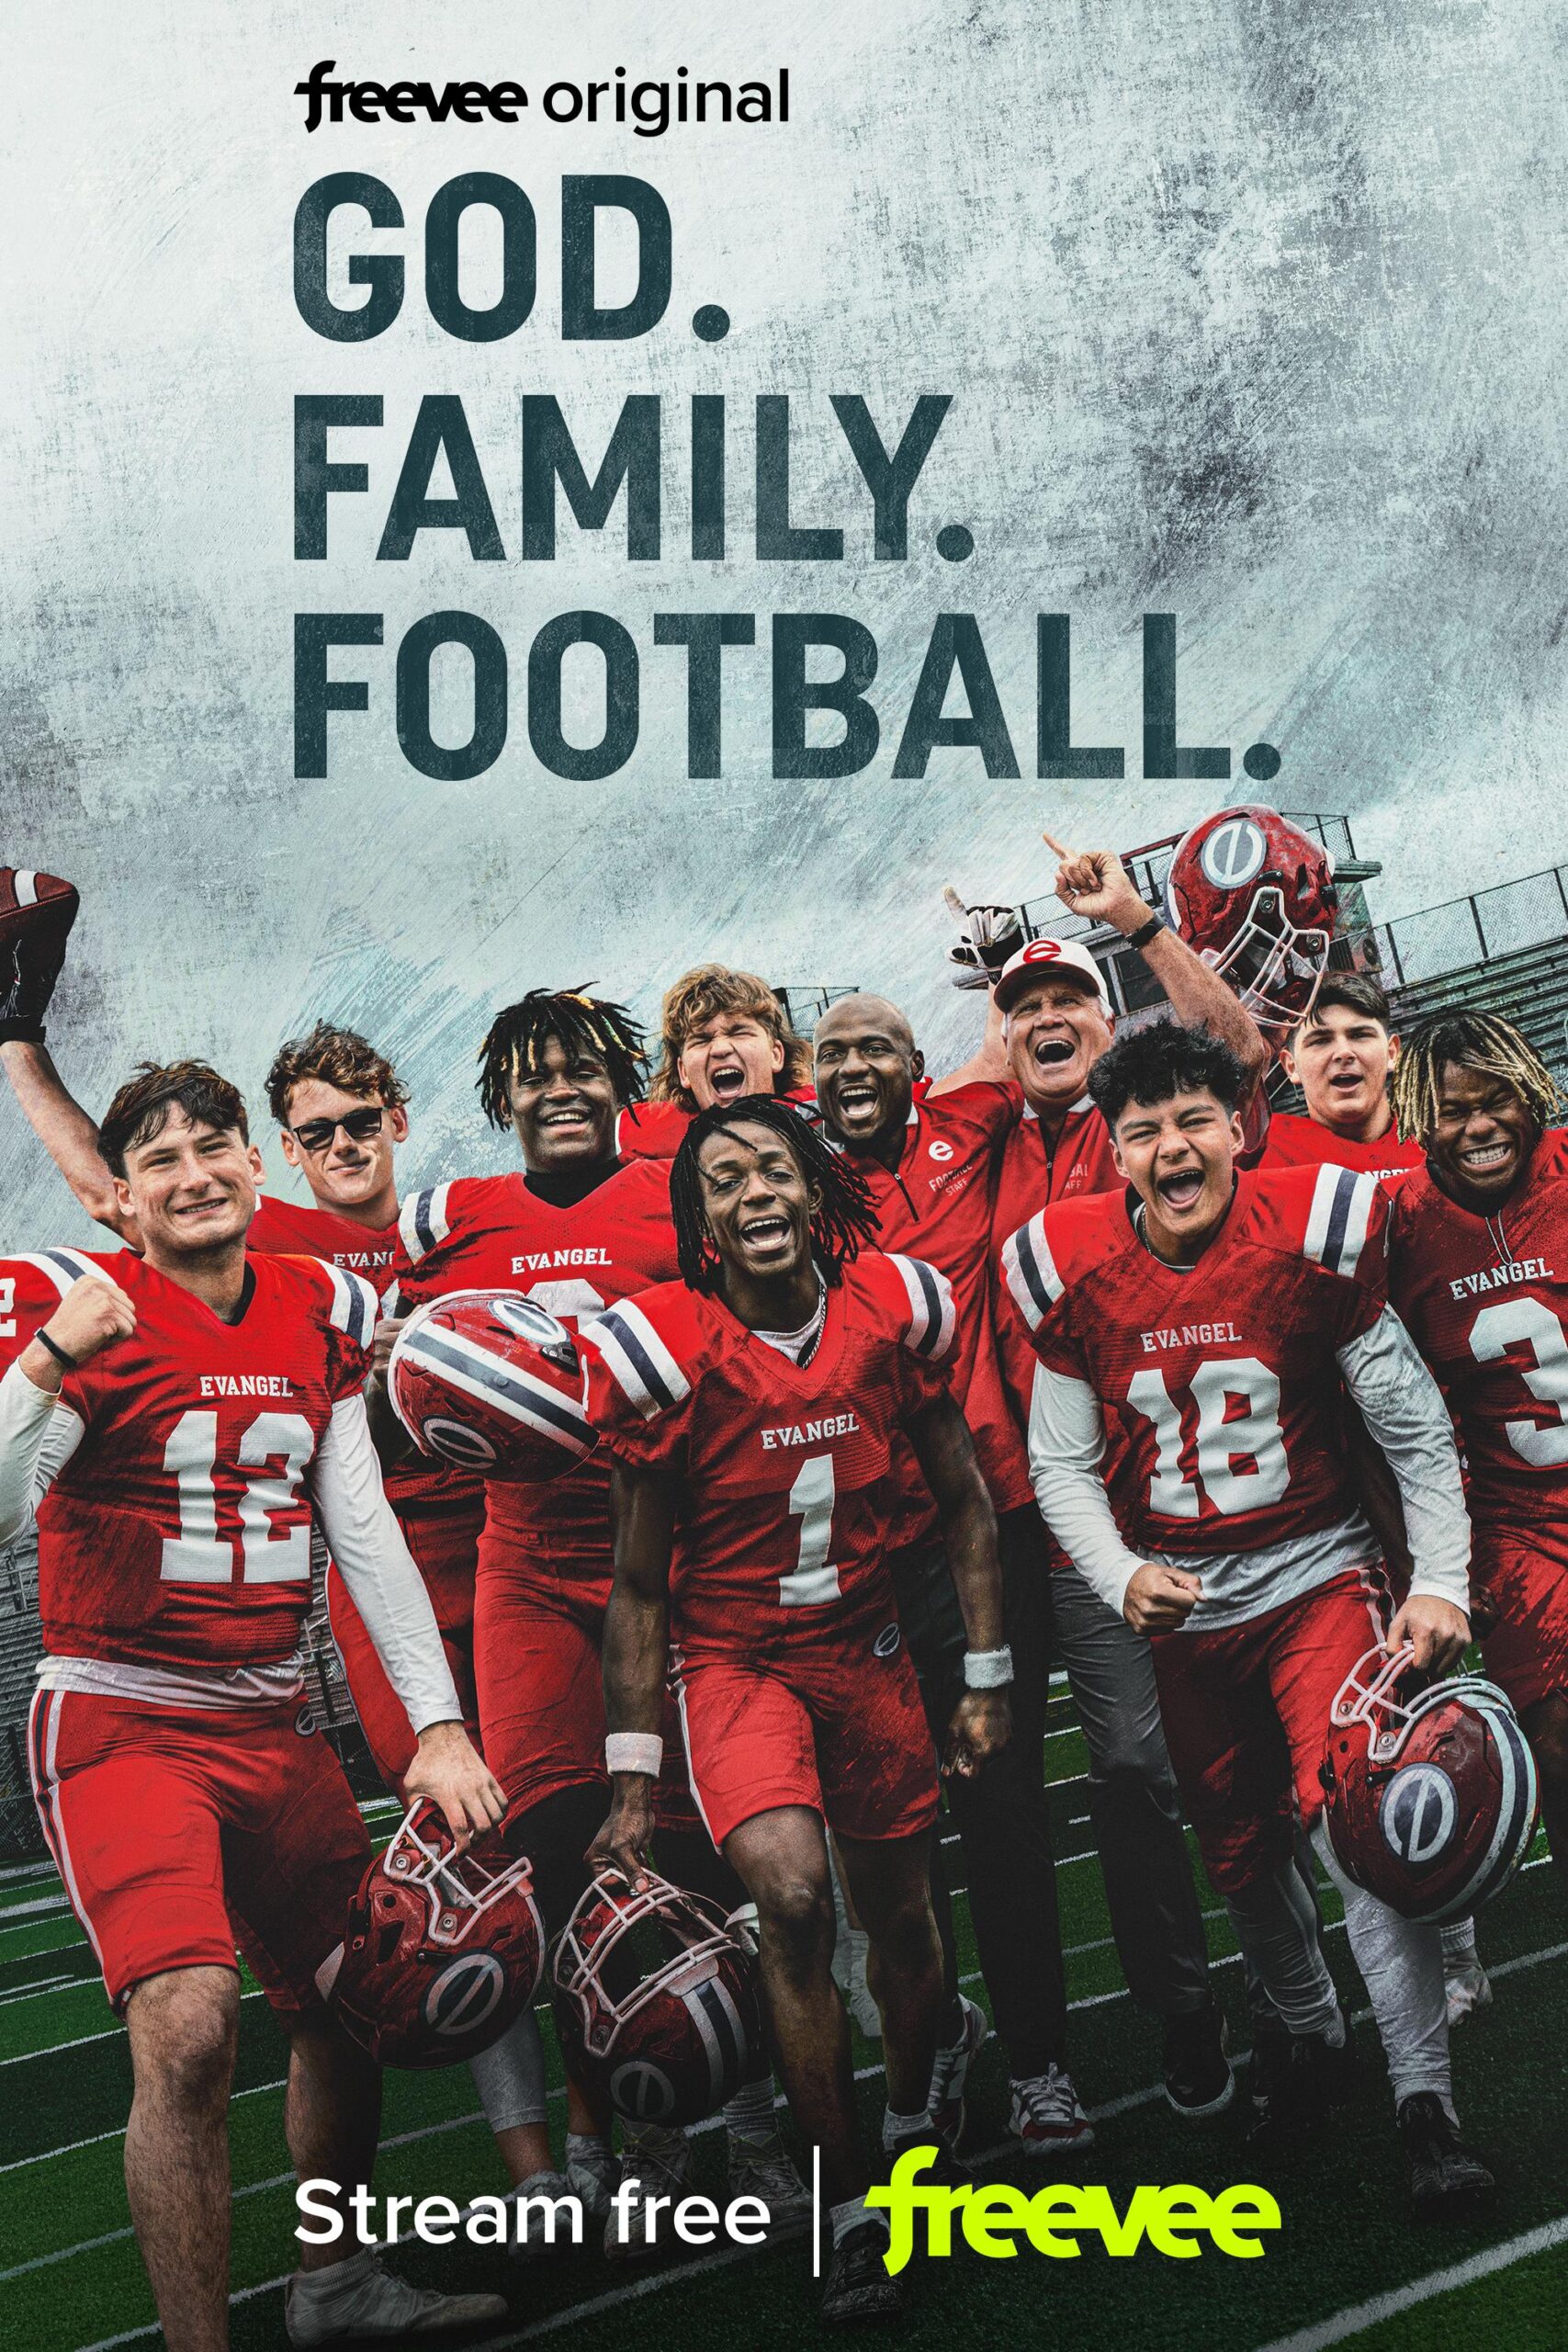 Amazon Freevee’s Coming-of-Age Sports Docuseries "God. Family. Football." Arrives September 1